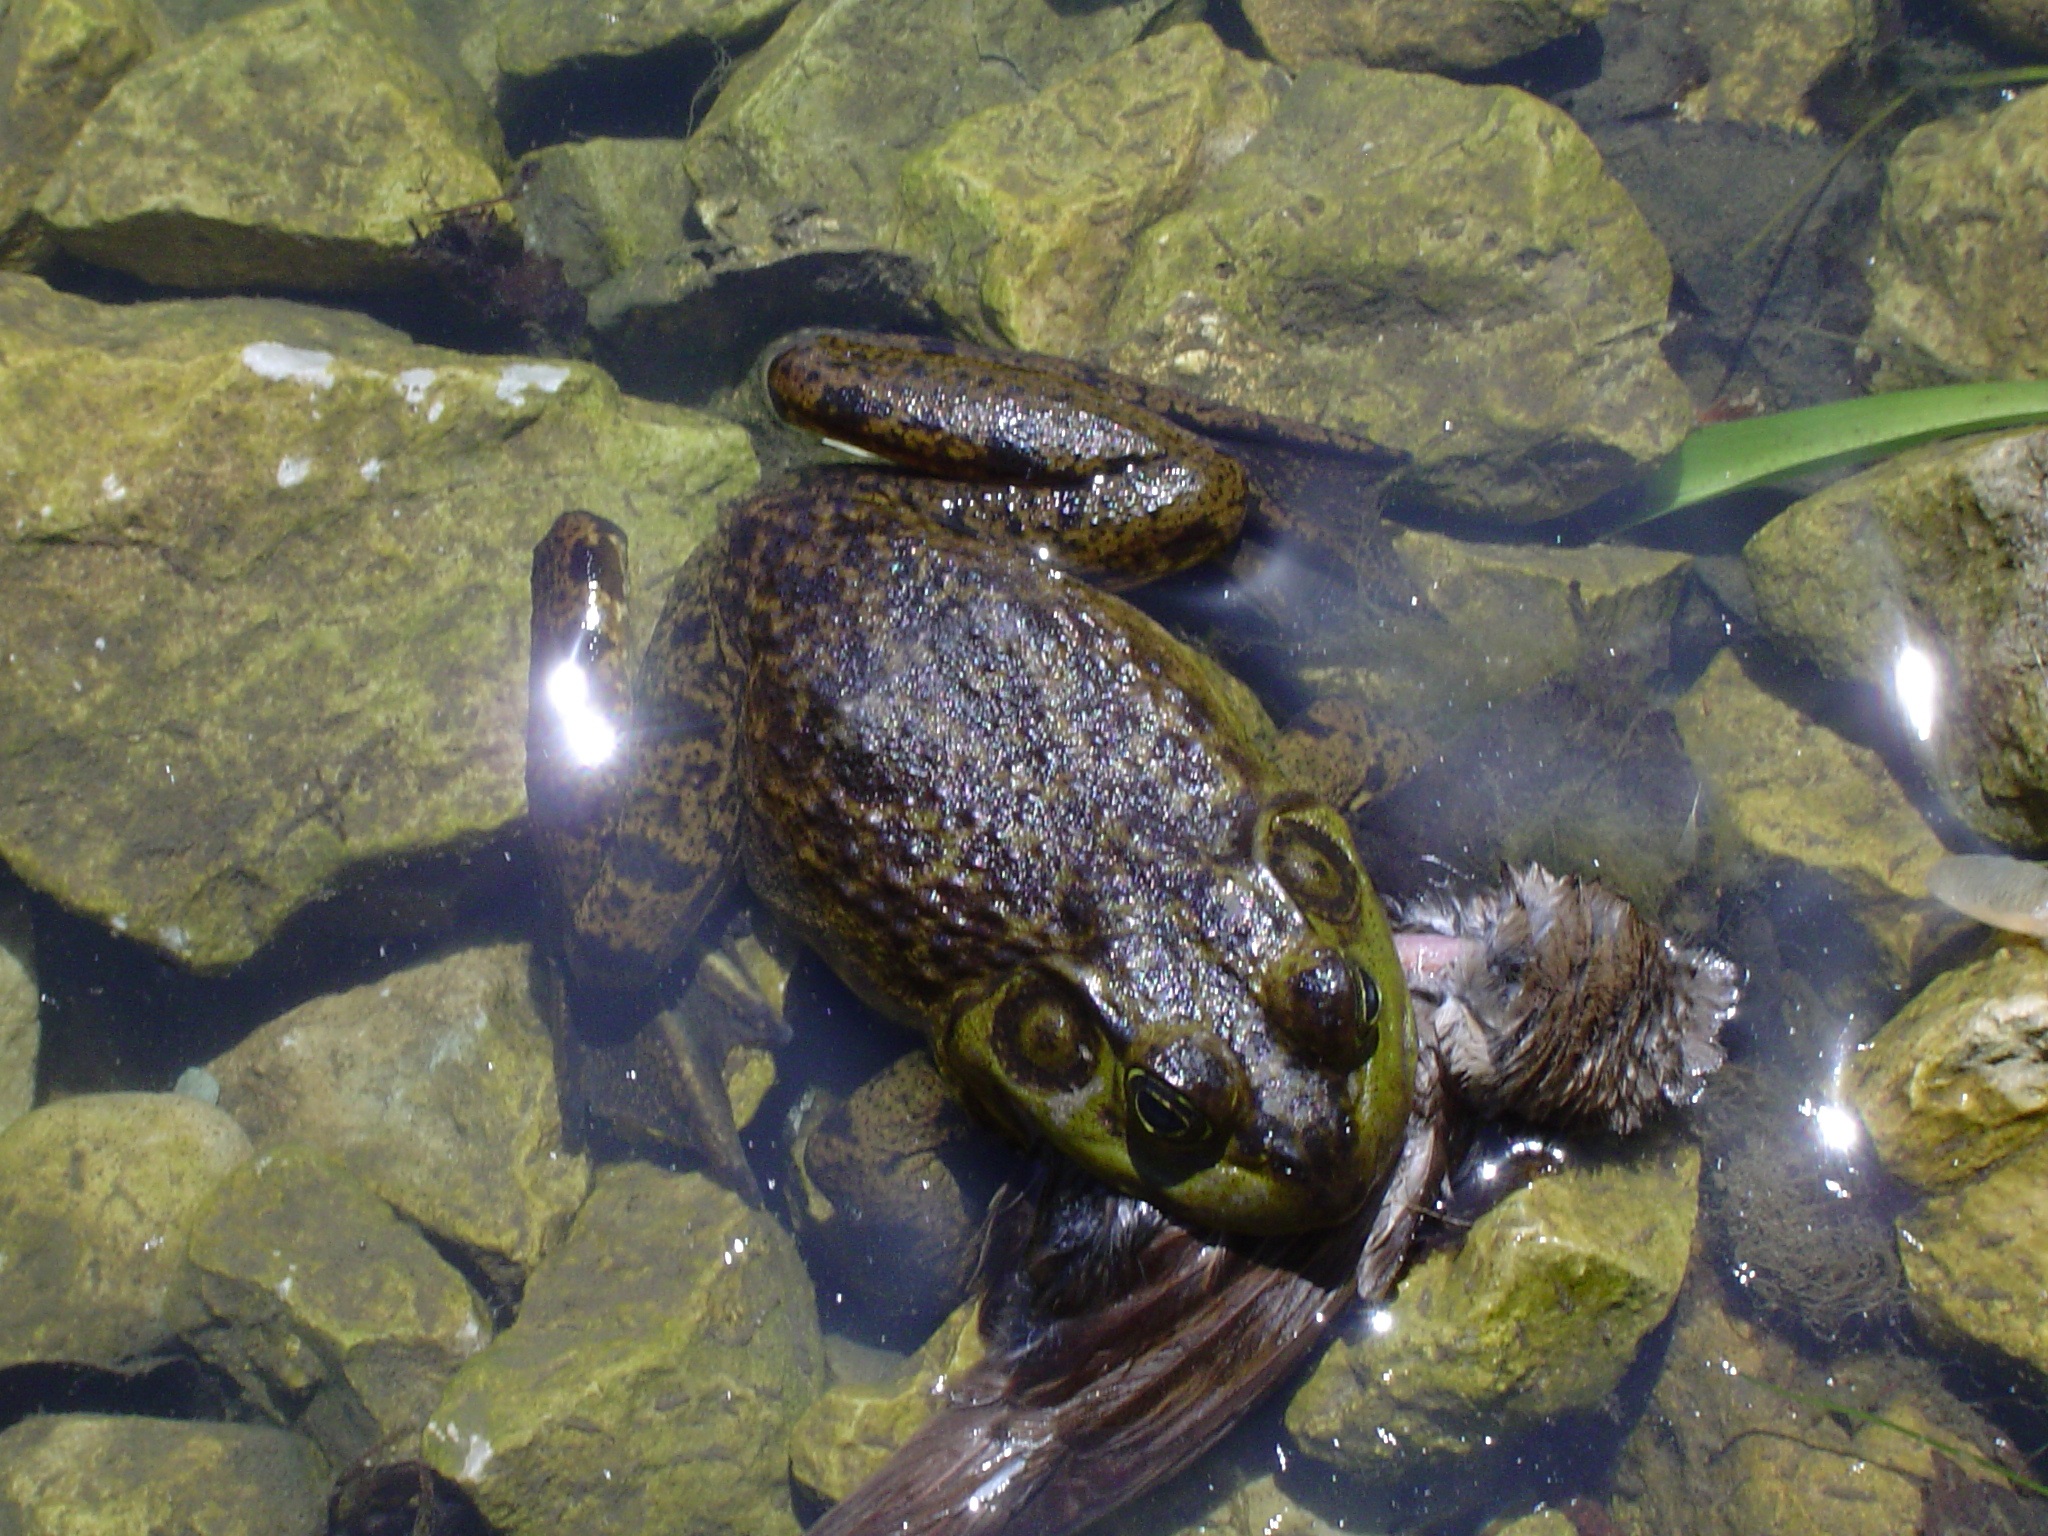 Frog in the water photo